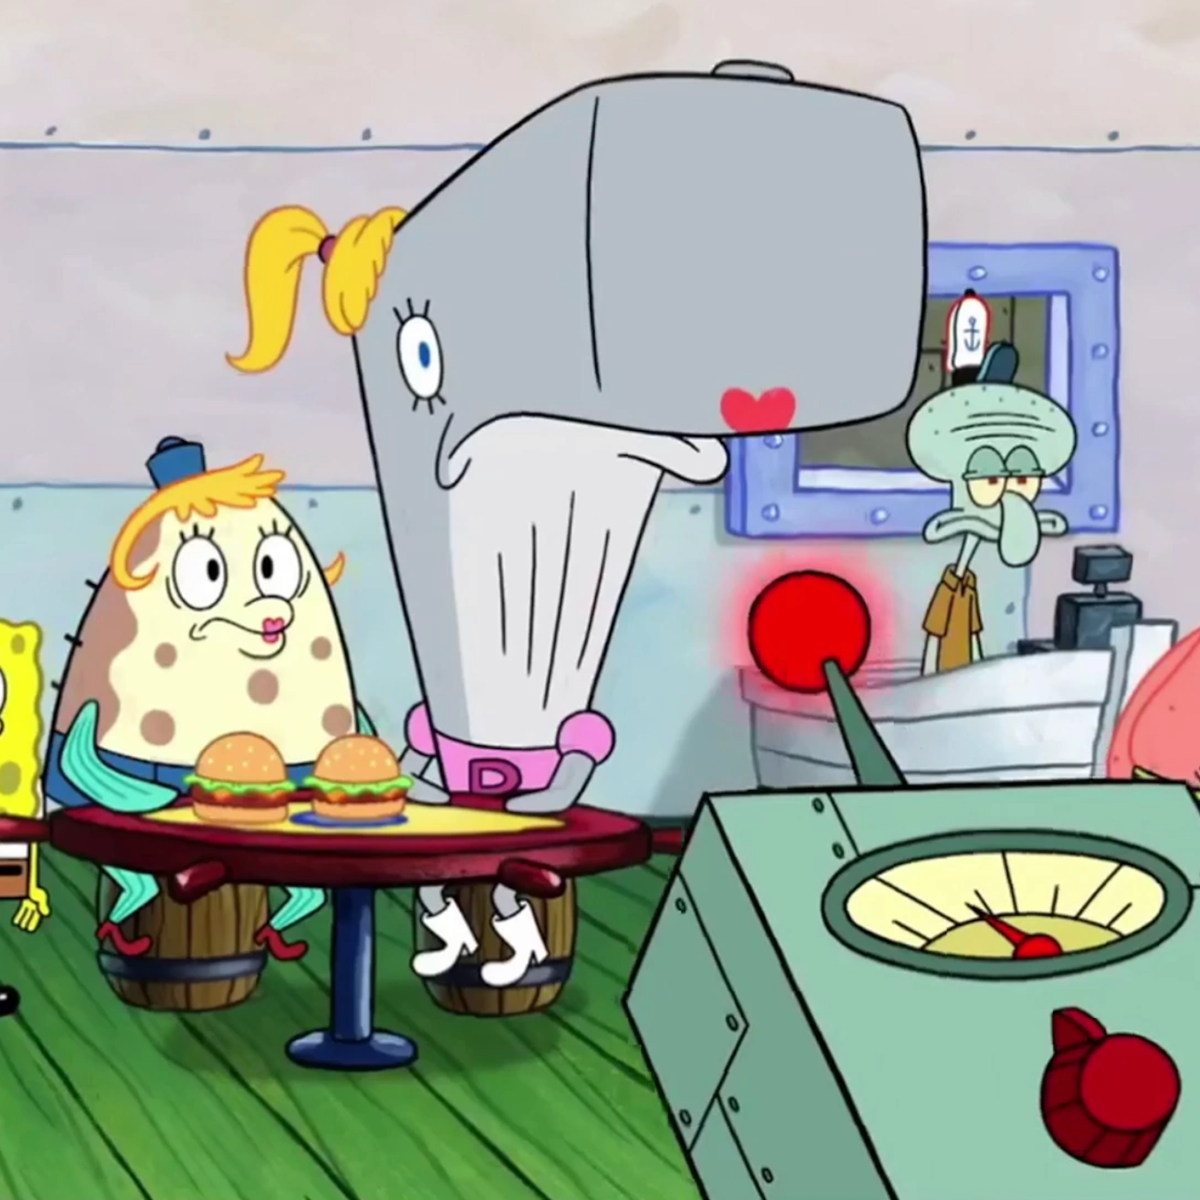 Spongebob Squarepants: Virus-themed episode pulled from air amid pandemic